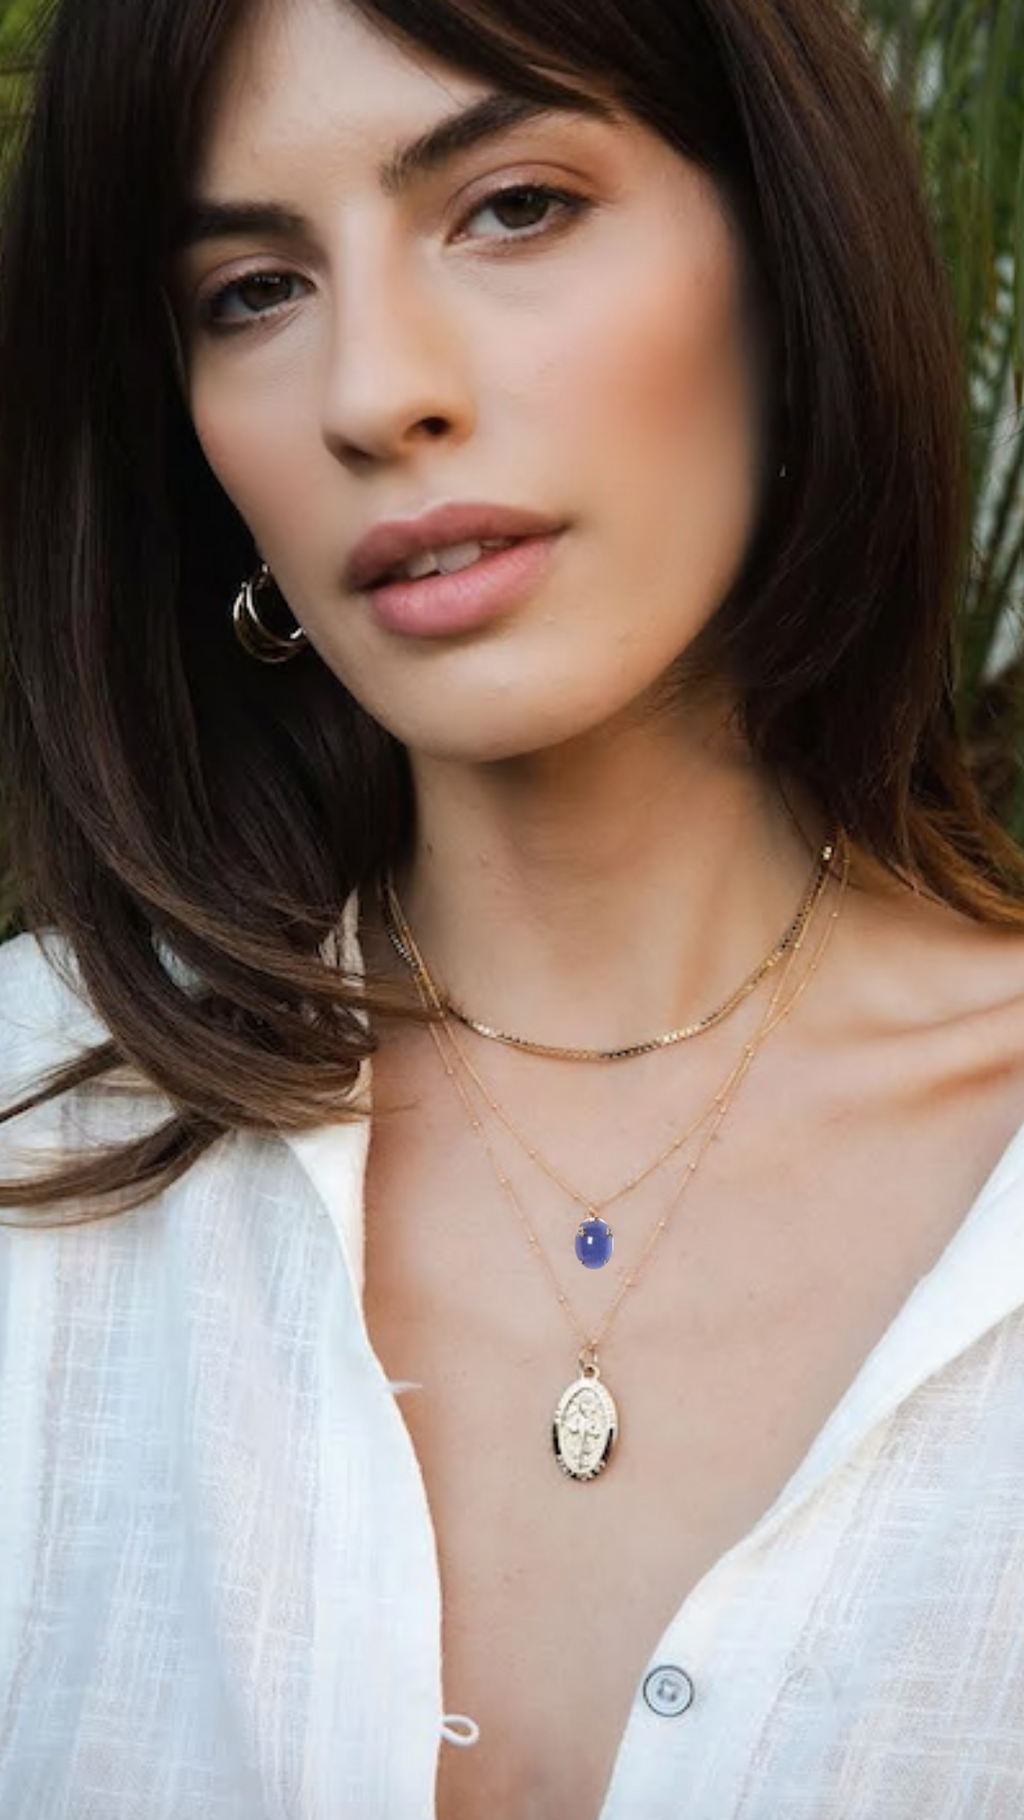 LUX Necklace in Tanzanite